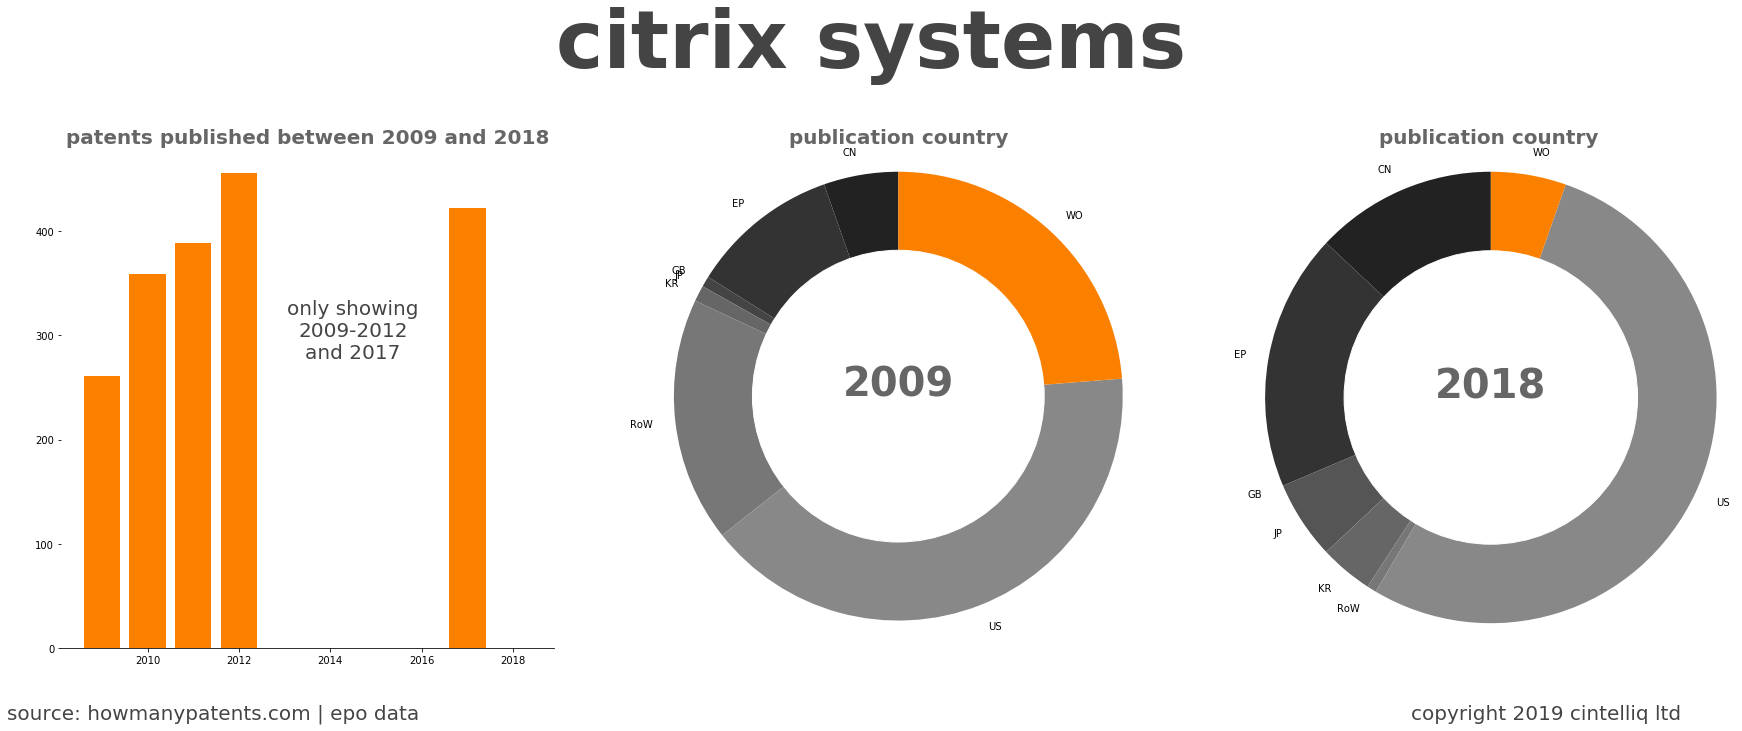 summary of patents for Citrix Systems